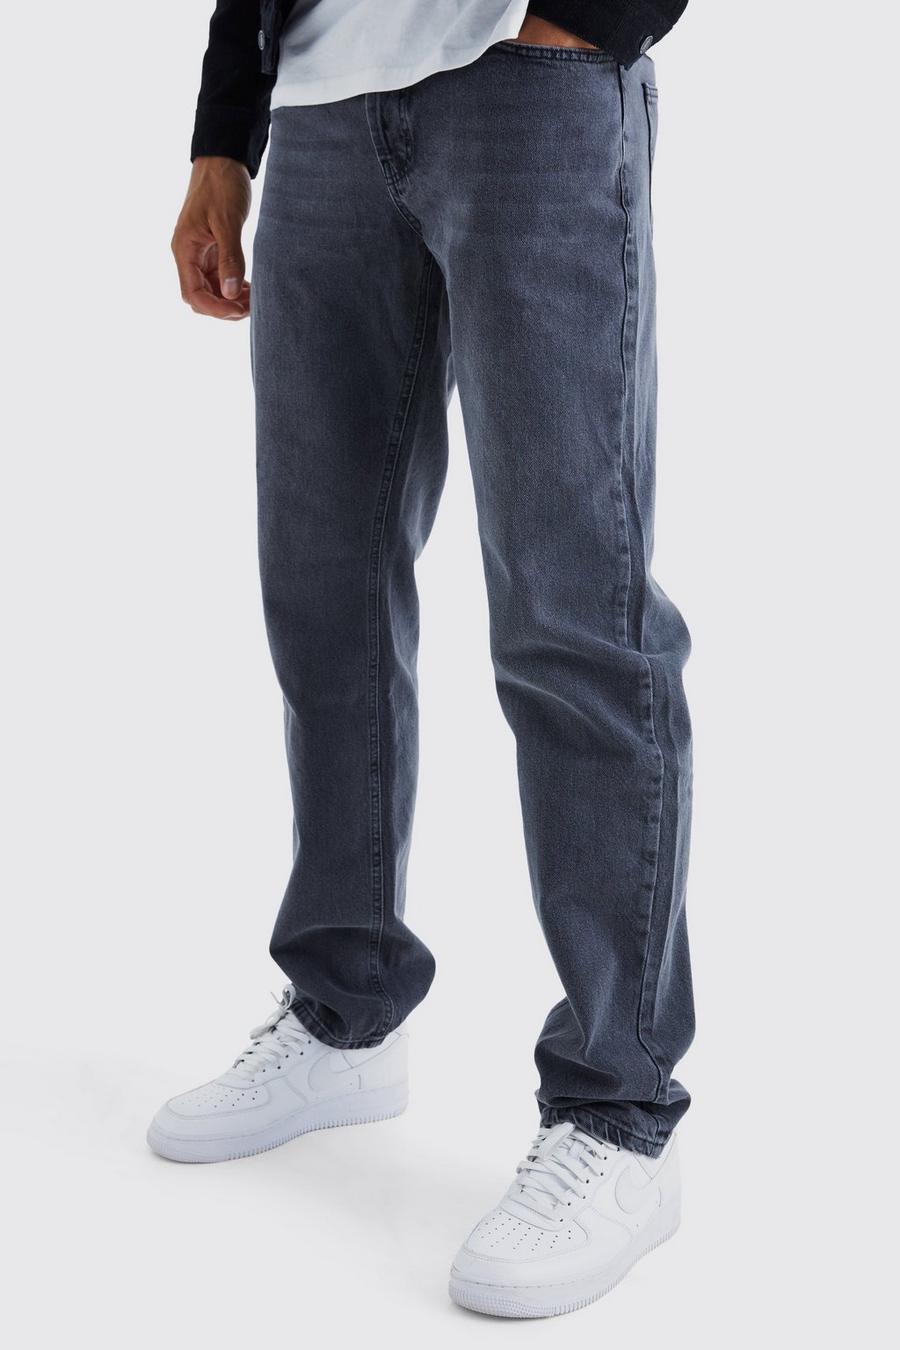 Tall lockere geprägte Jeans, Charcoal